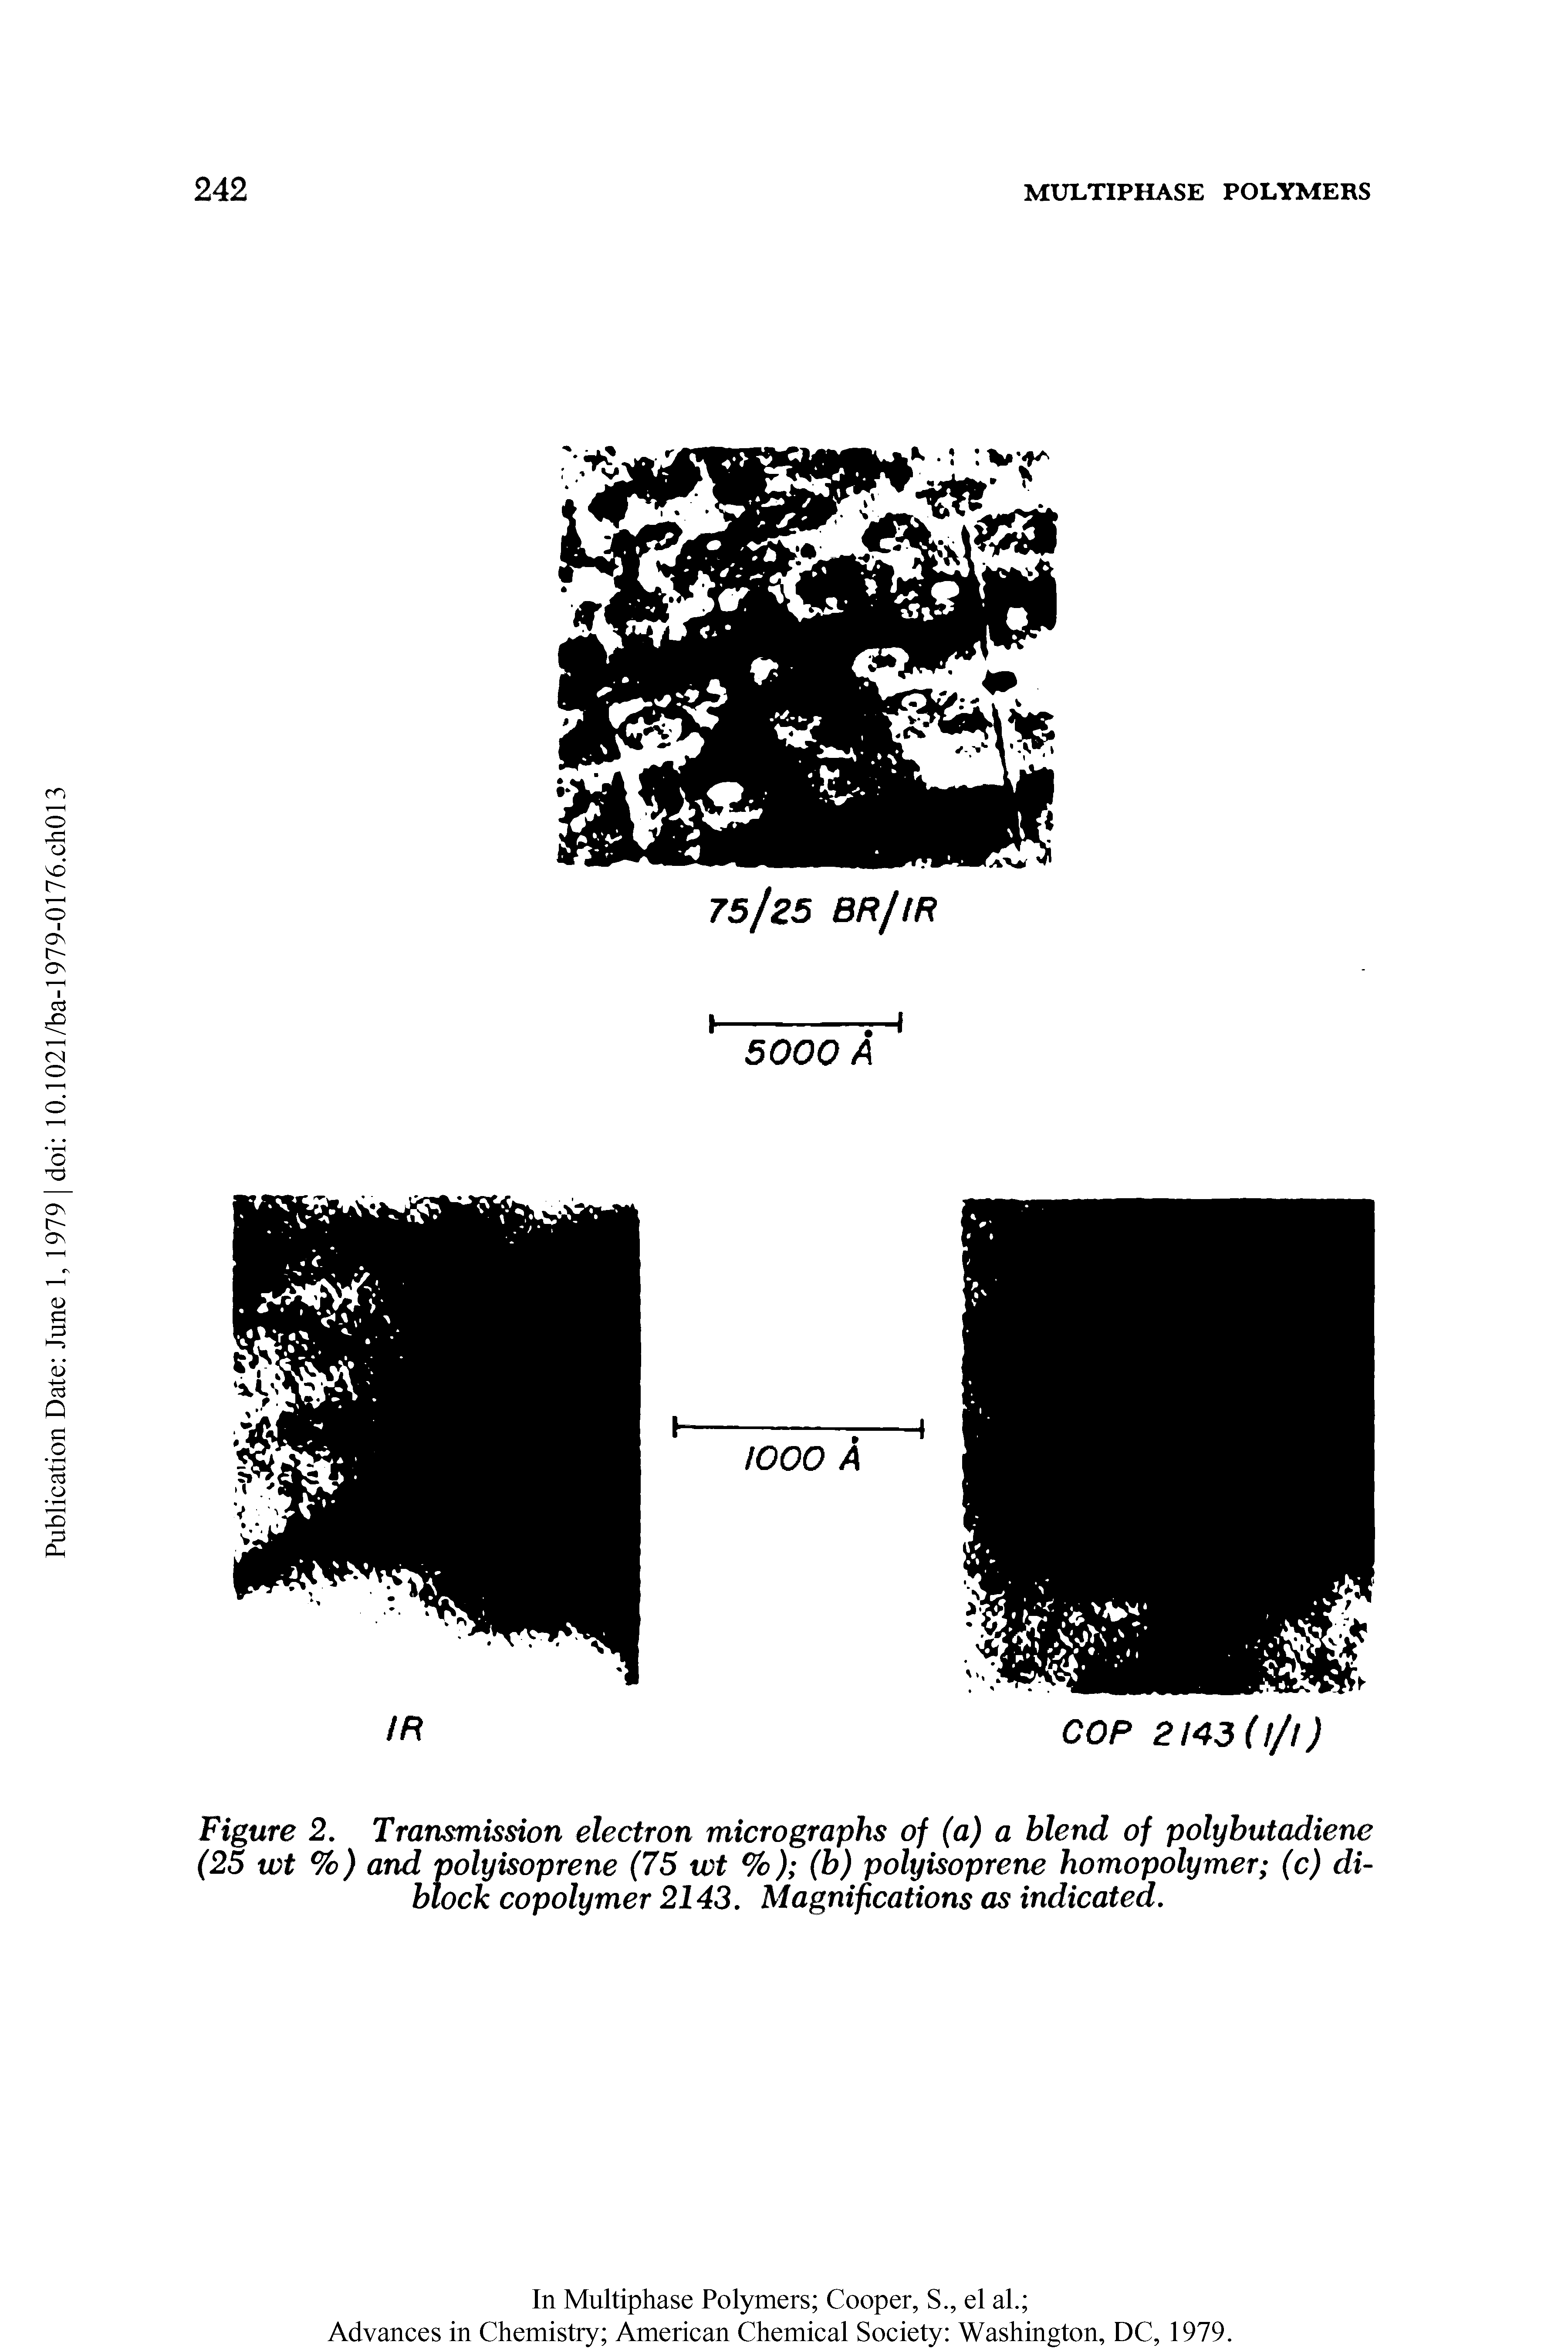 Figure 2. Transmission electron micrographs of (a) a blend of polybutadiene (25 vot %) and polyisoprene (75 wt %) (b) polyisoprene homopolymer (c) diblock copolymer 2143. Magnifications as indicated.